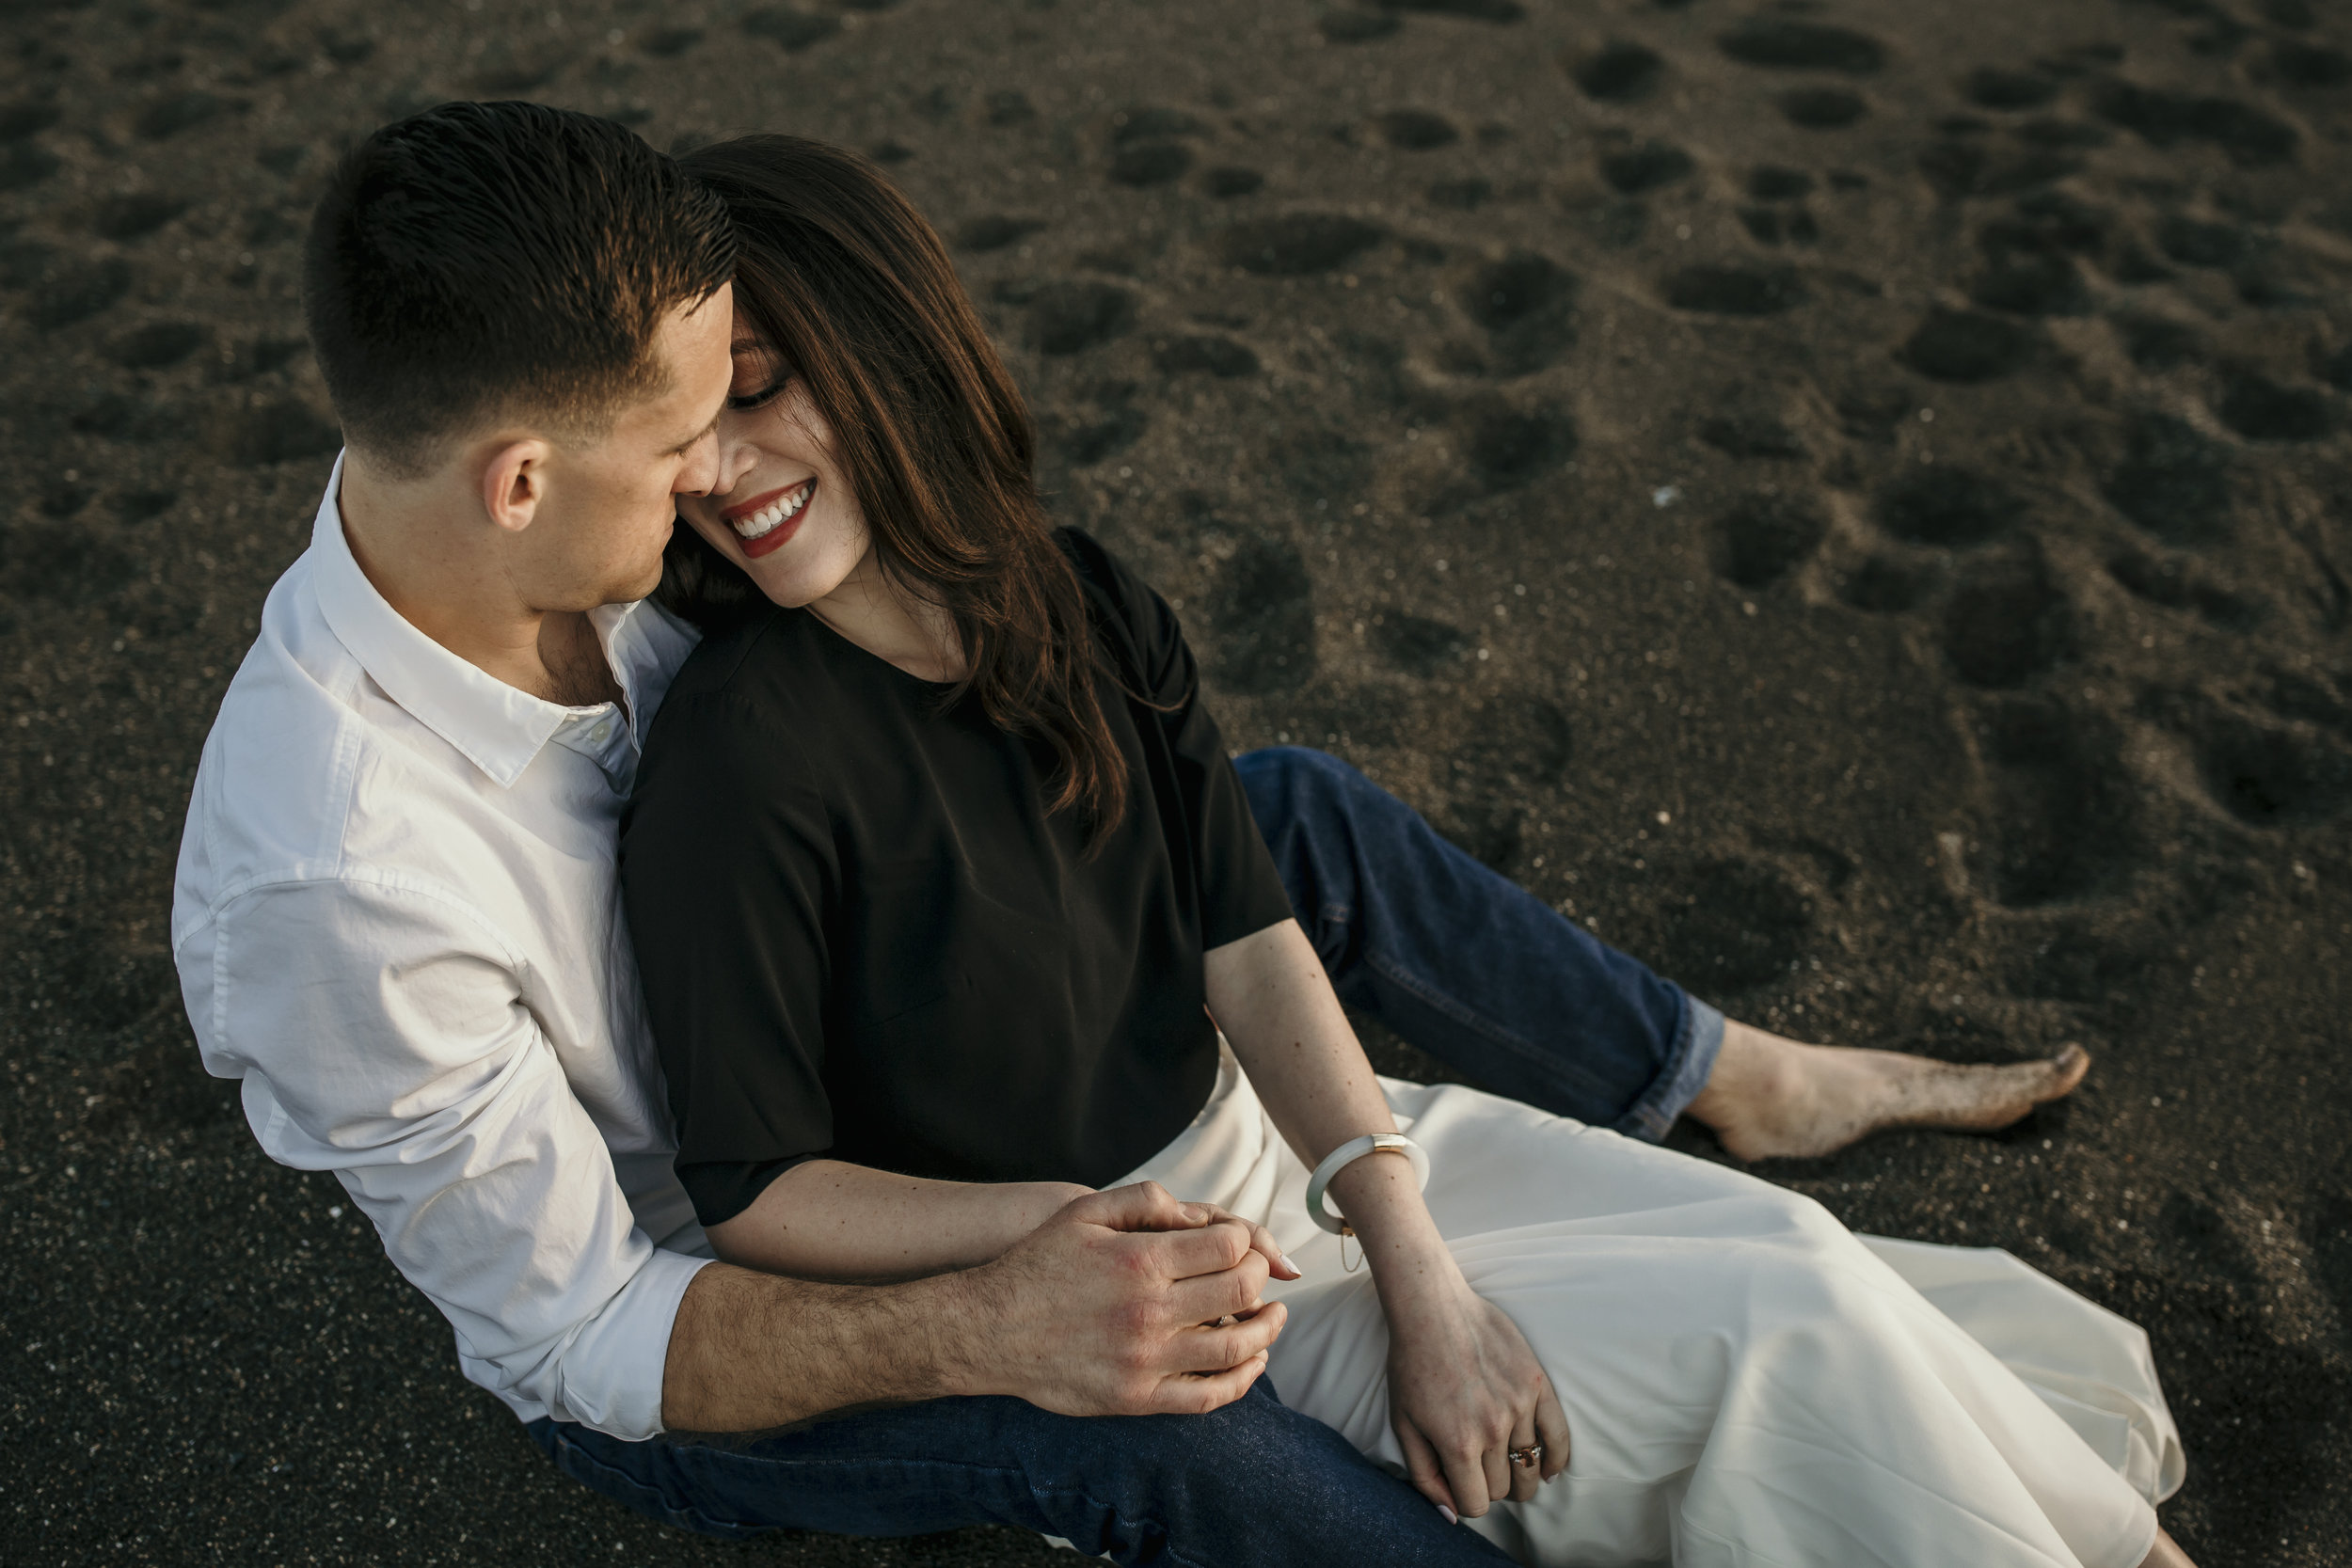 san francisco engagement + wedding photography by bre thurston | outside lifestyle photographer in the bay area | engaged couple on the beach at sunset